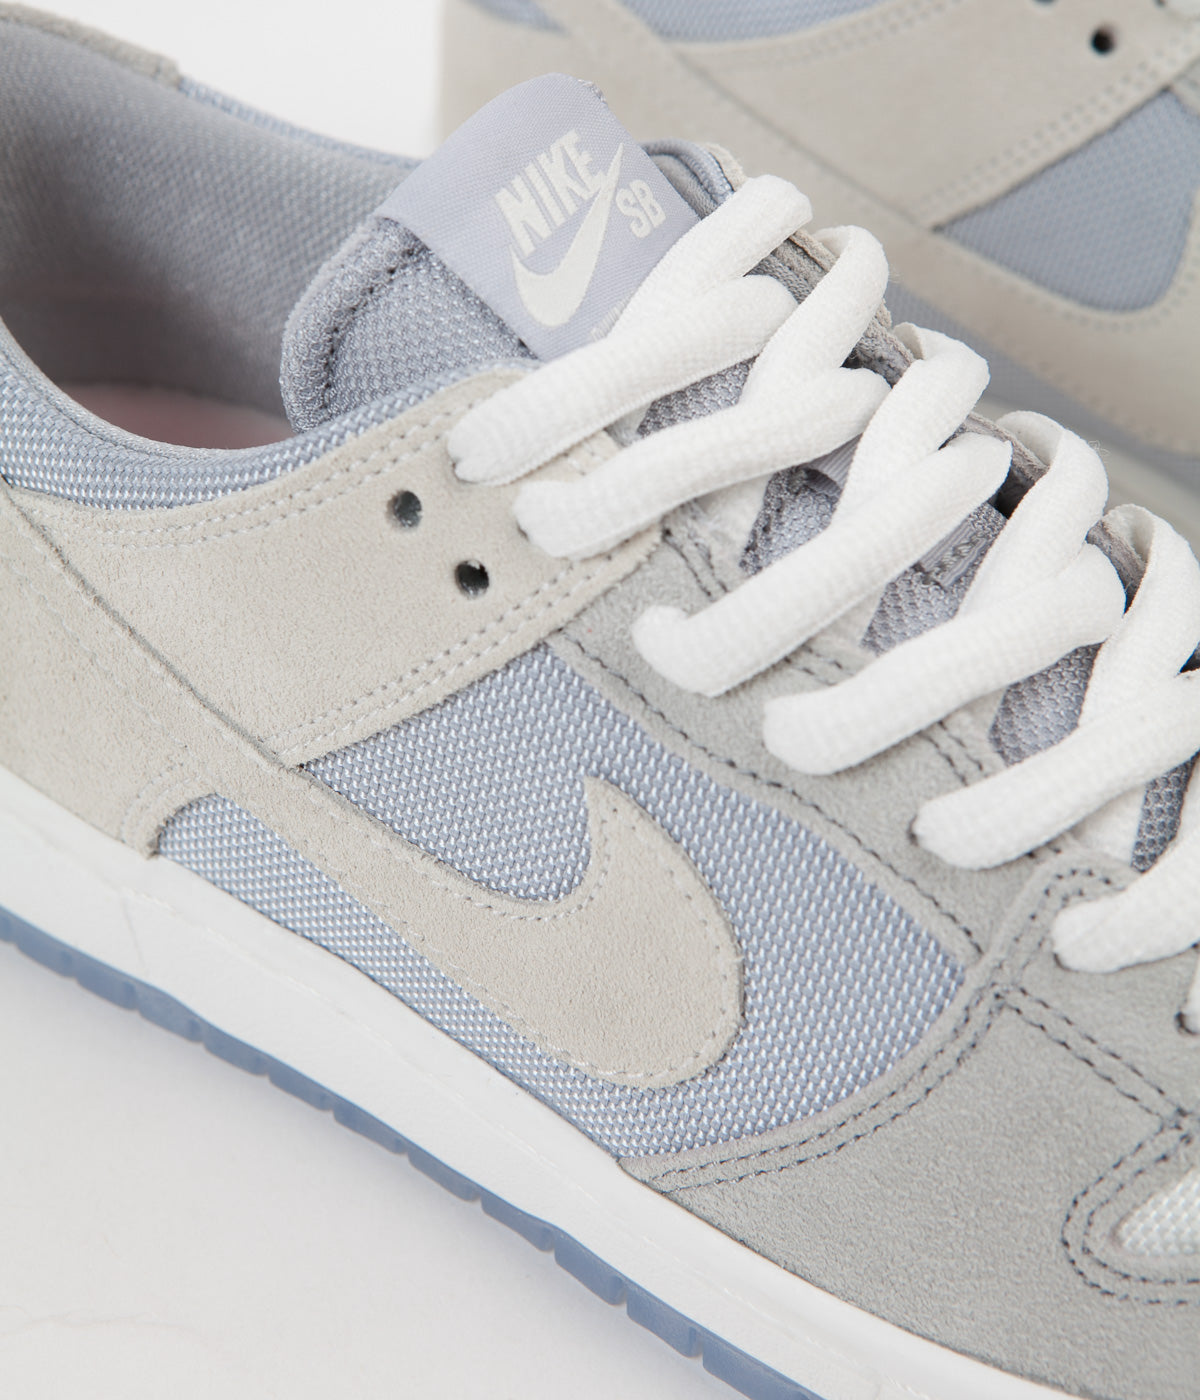 Nike SB Dunk Low Pro Shoes - Wolf Grey / Summit White - Clear | Flatspot